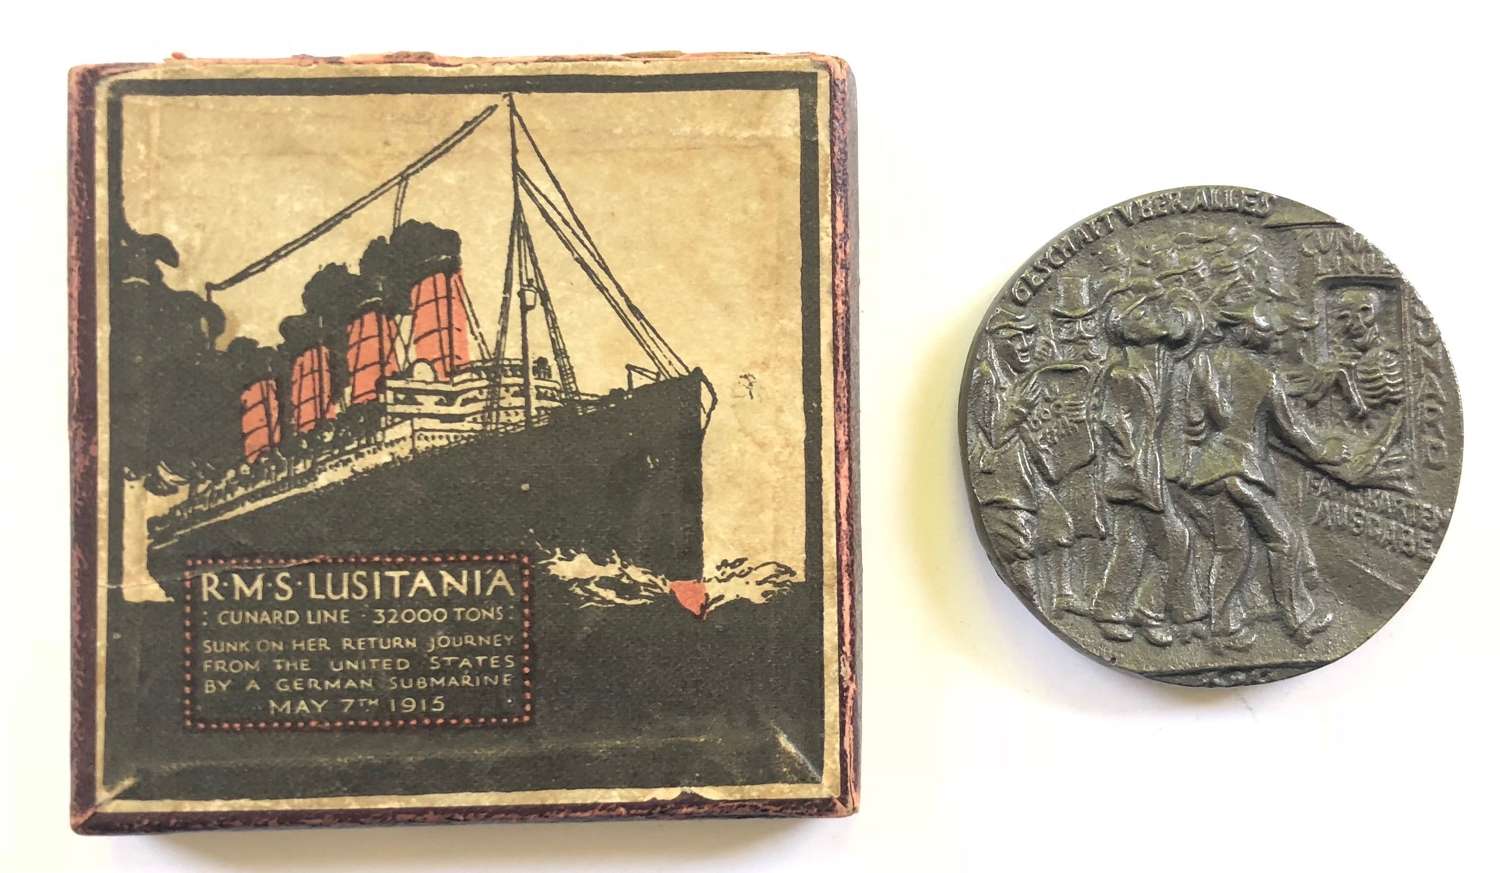 RMS Lusitania Cunard Shipping Line commemorative medal.